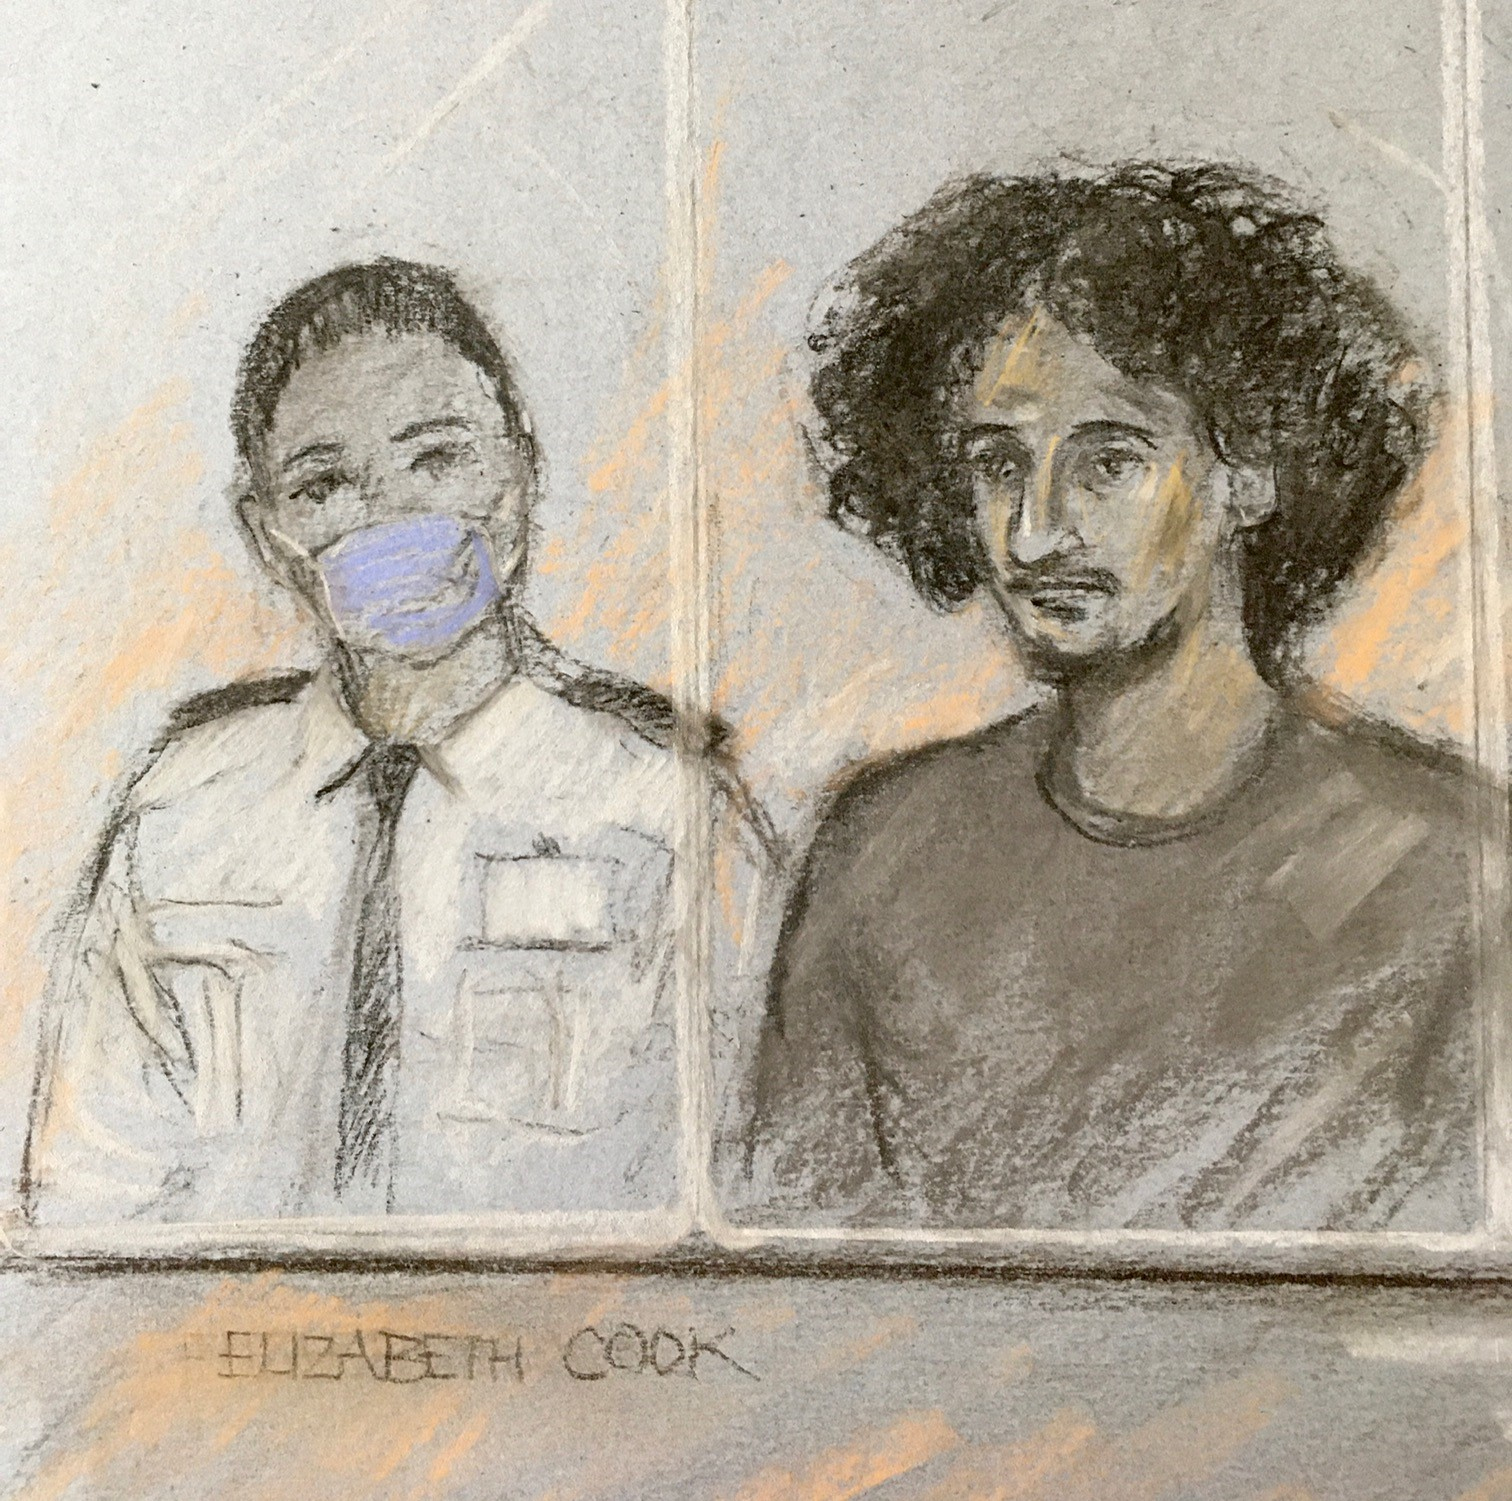 Court artist sketch by Elizabeth Cook of Danyal Hussein appearing in the dock at the Old Bailey (Photo: PA)